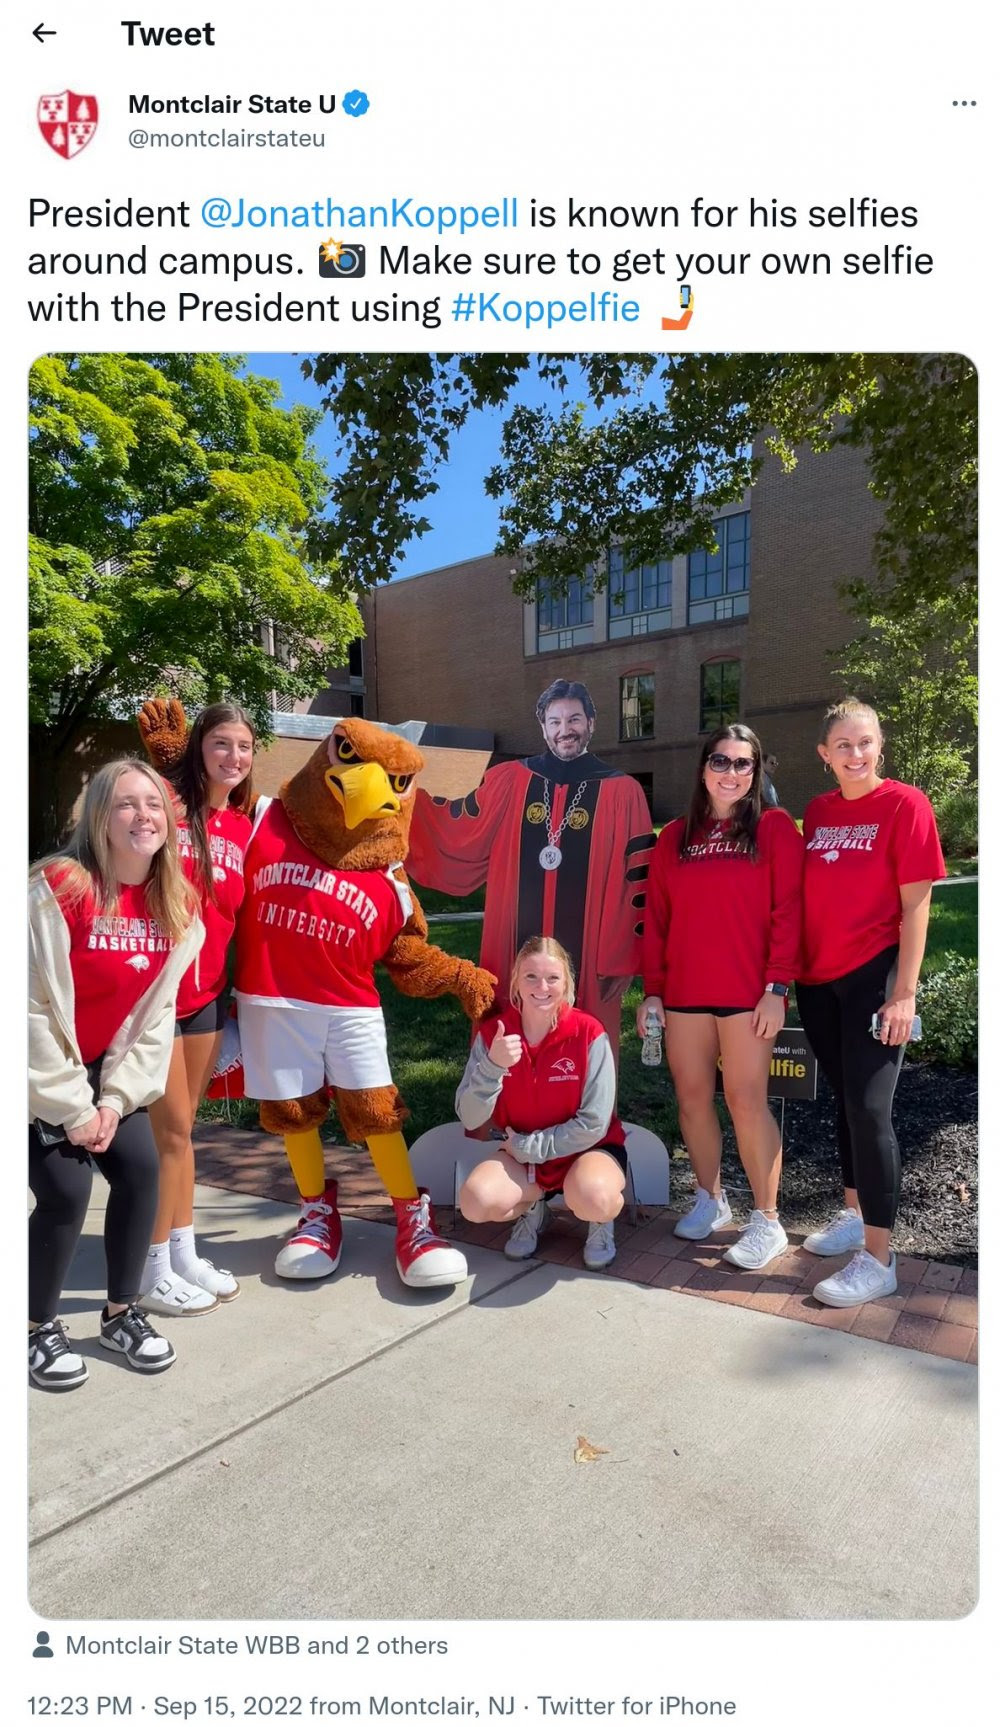 @montclairstateu: President @JonathanKoppell is known for his selfies around campus. Make sure to get your own selfie with the President using #Koppelfie